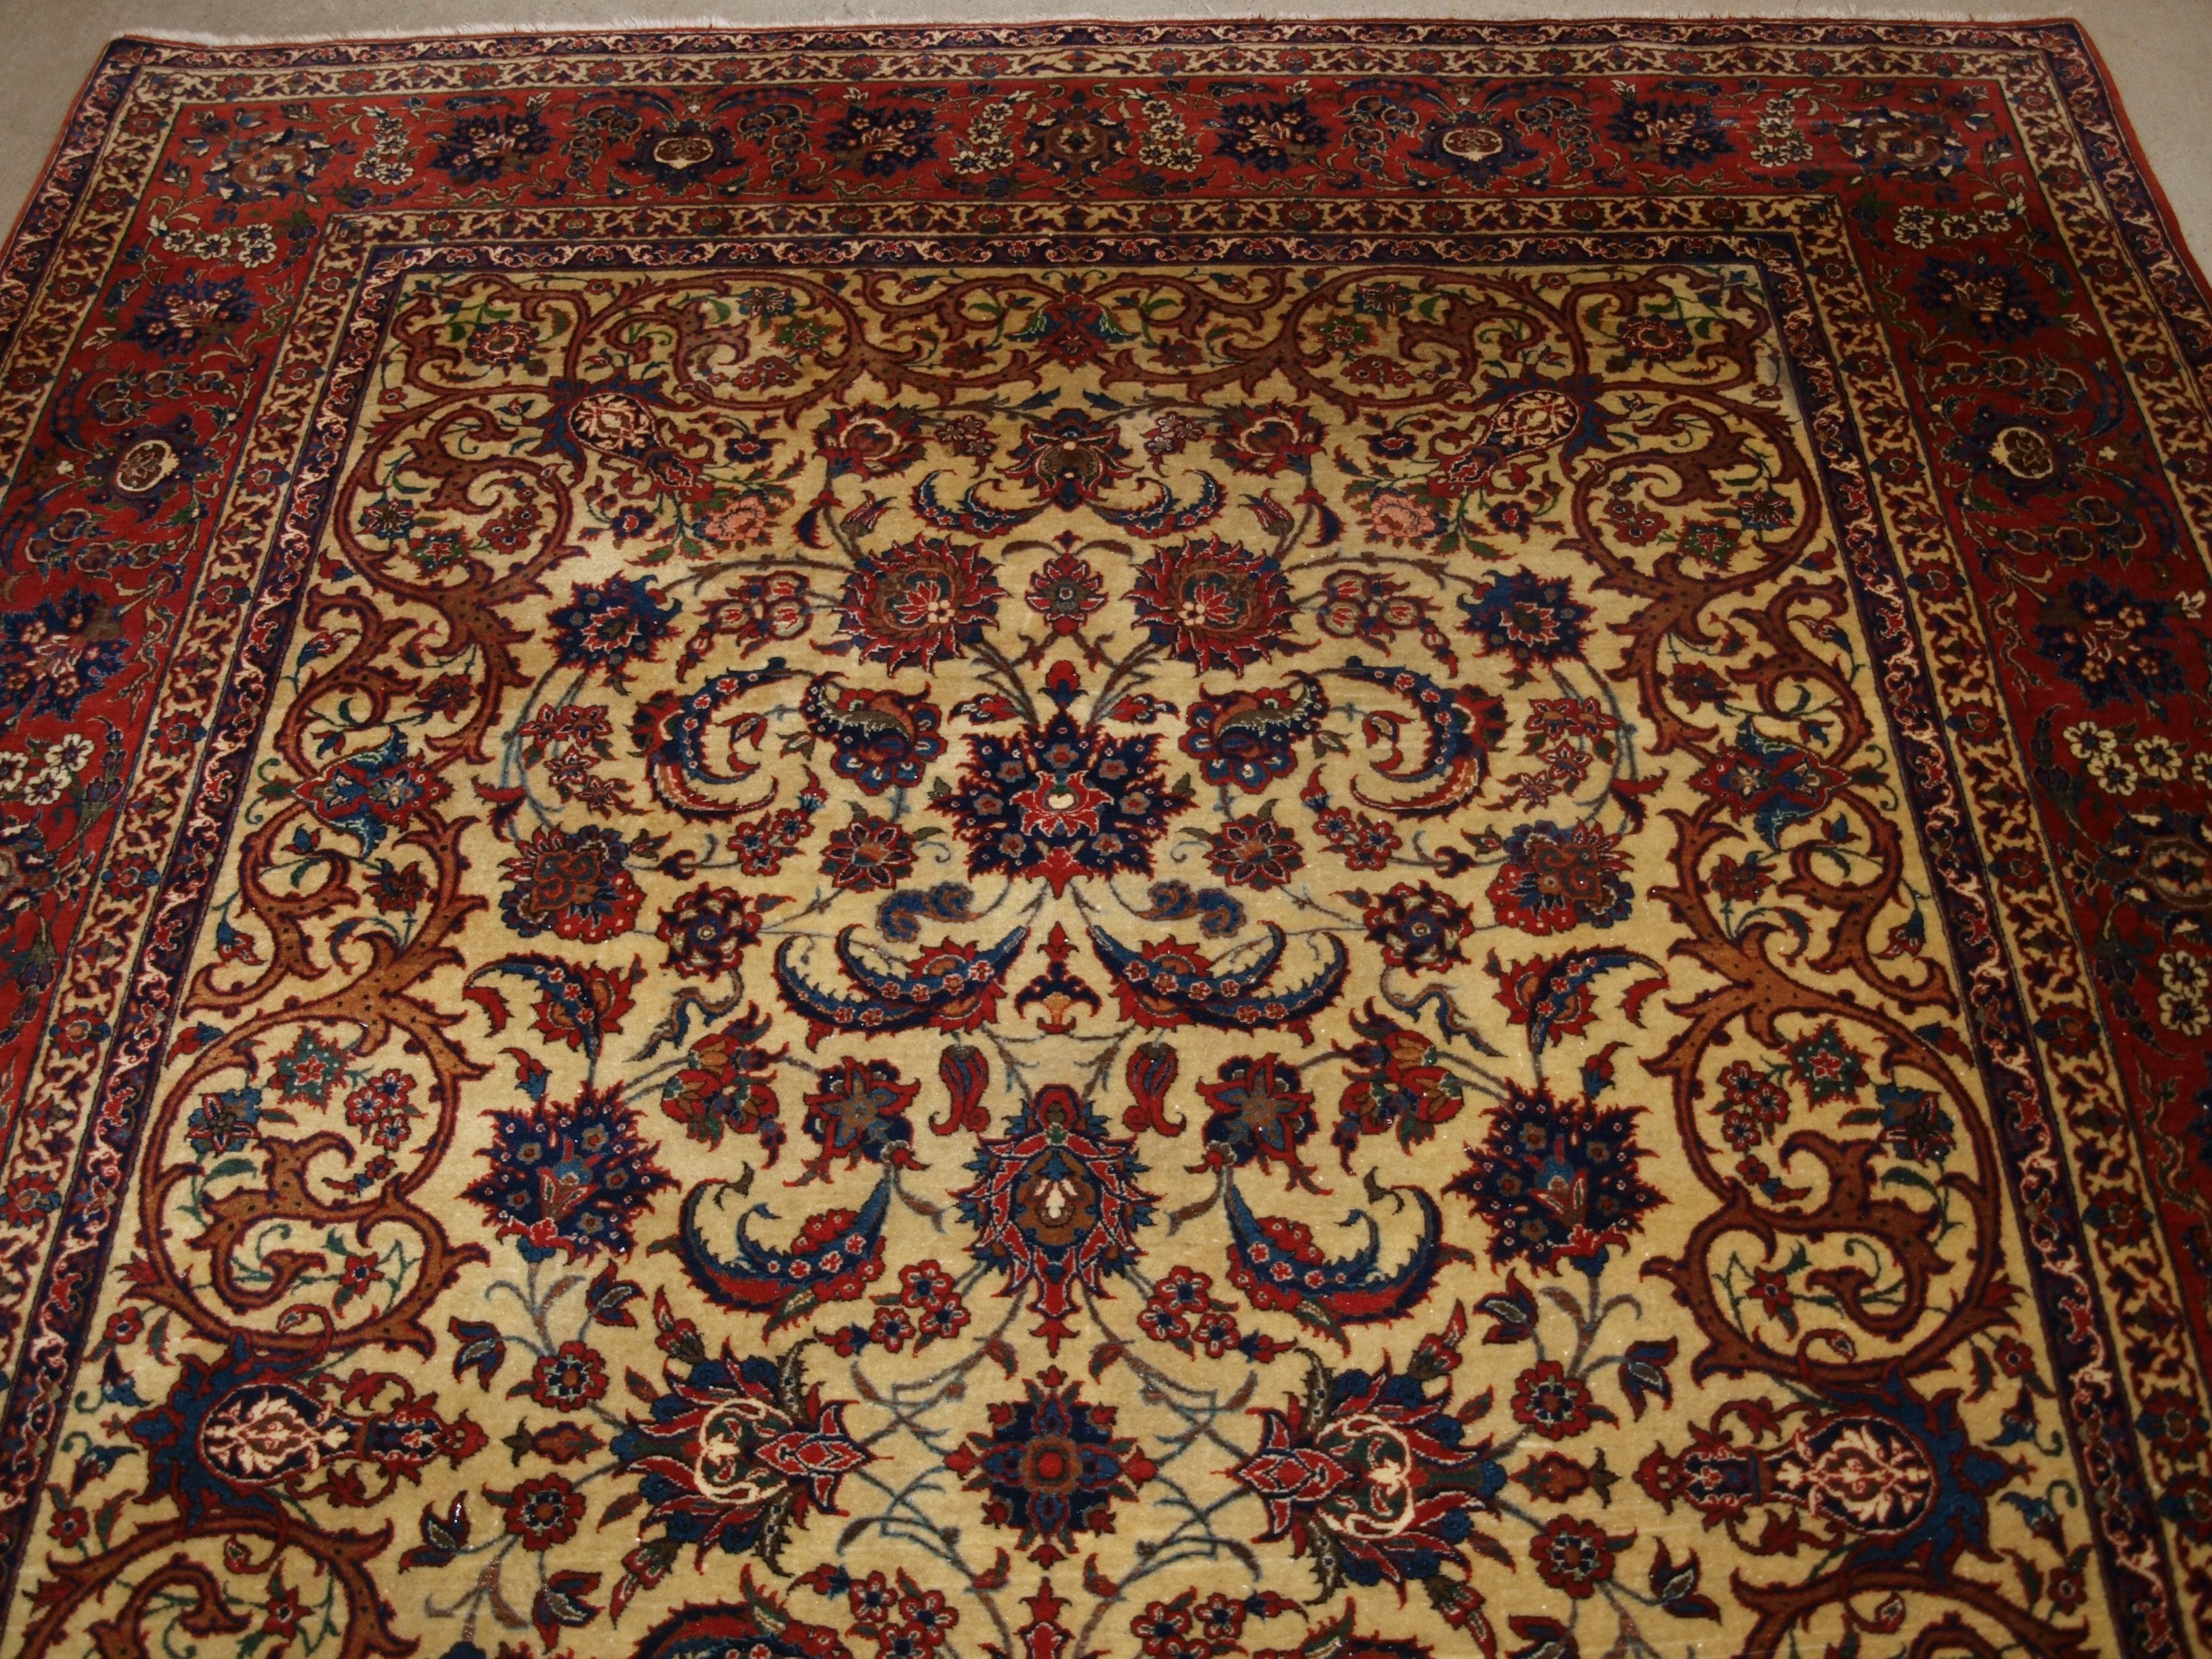 Old Persian Isfahan Carpet, of Superb Classic Design, Outstanding Color For Sale 5